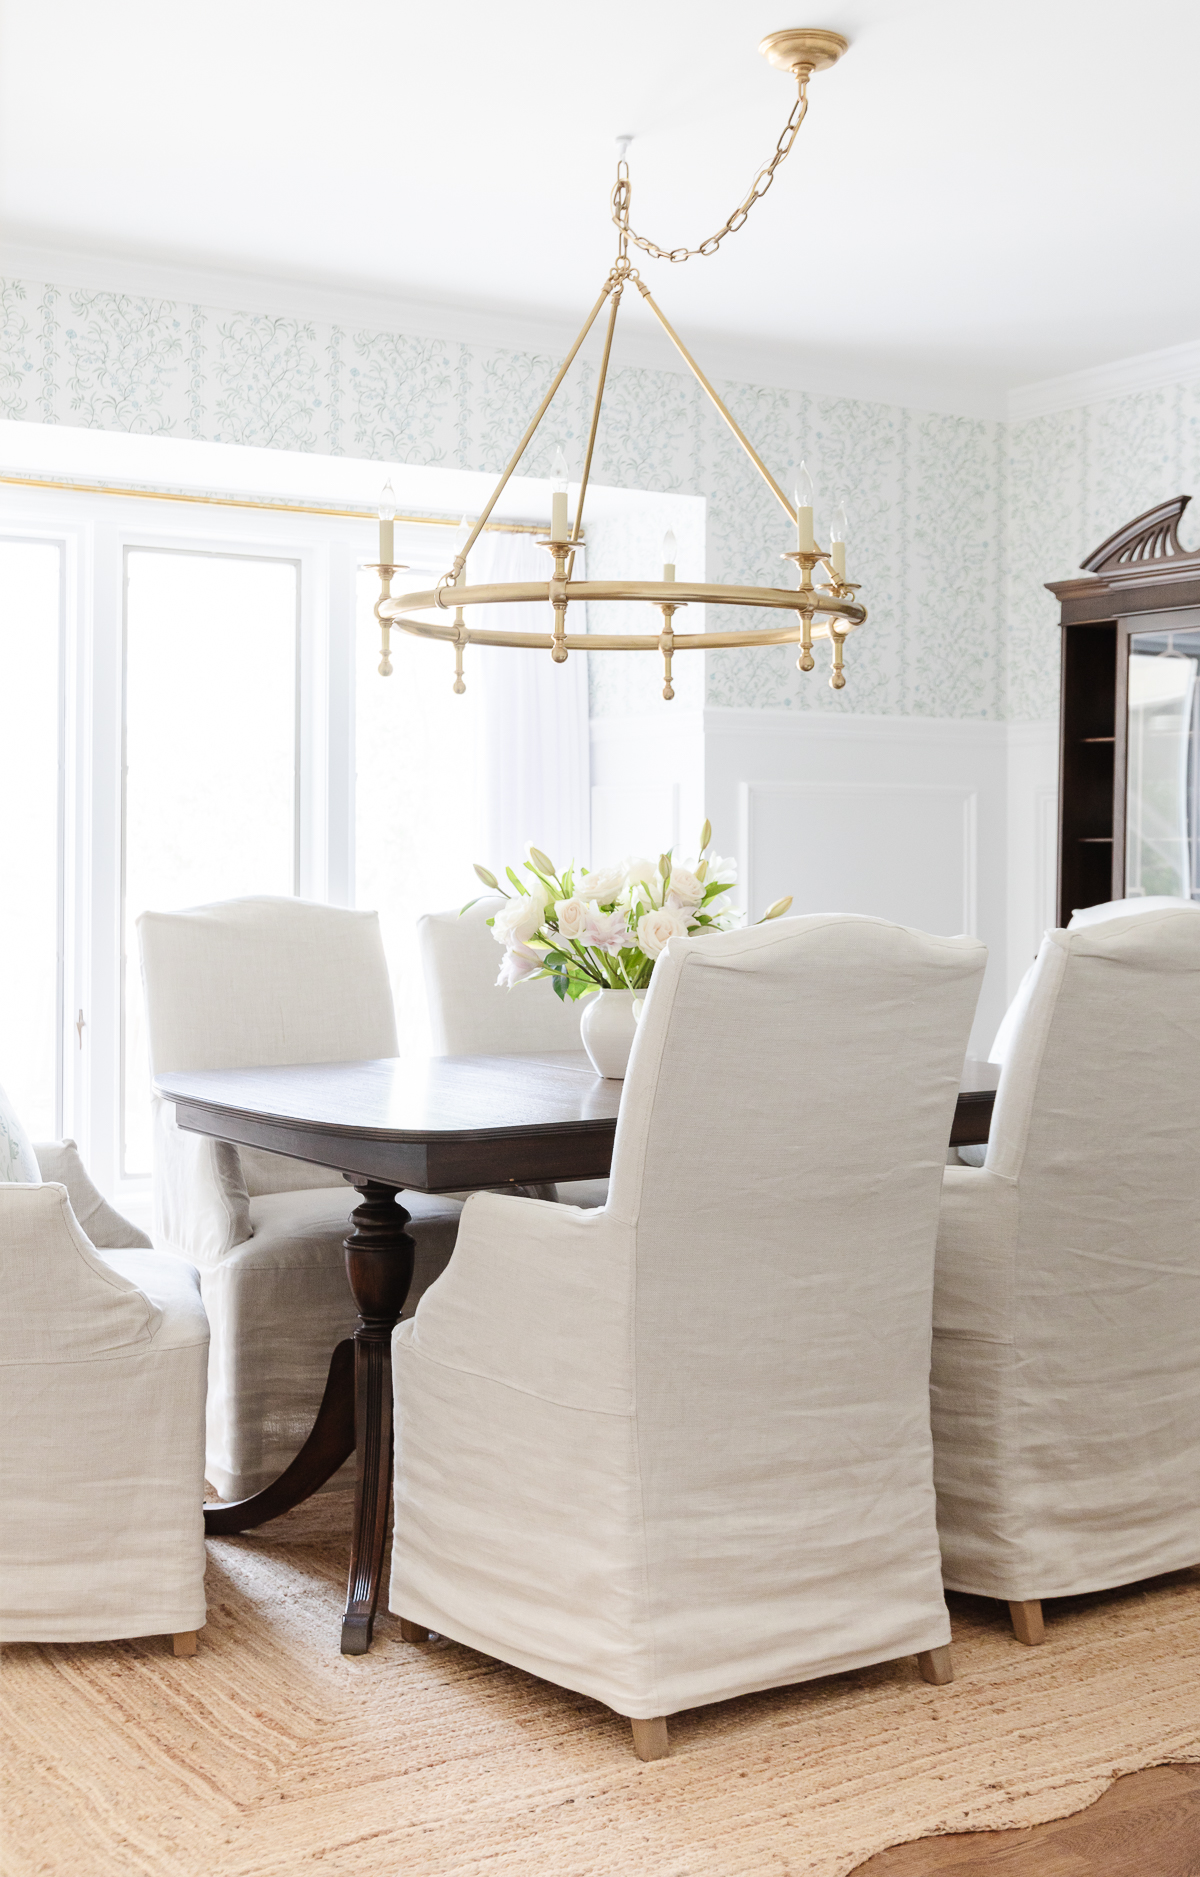 A dining room with white chairs and a chandelier adorned with pinch pleat drapes.